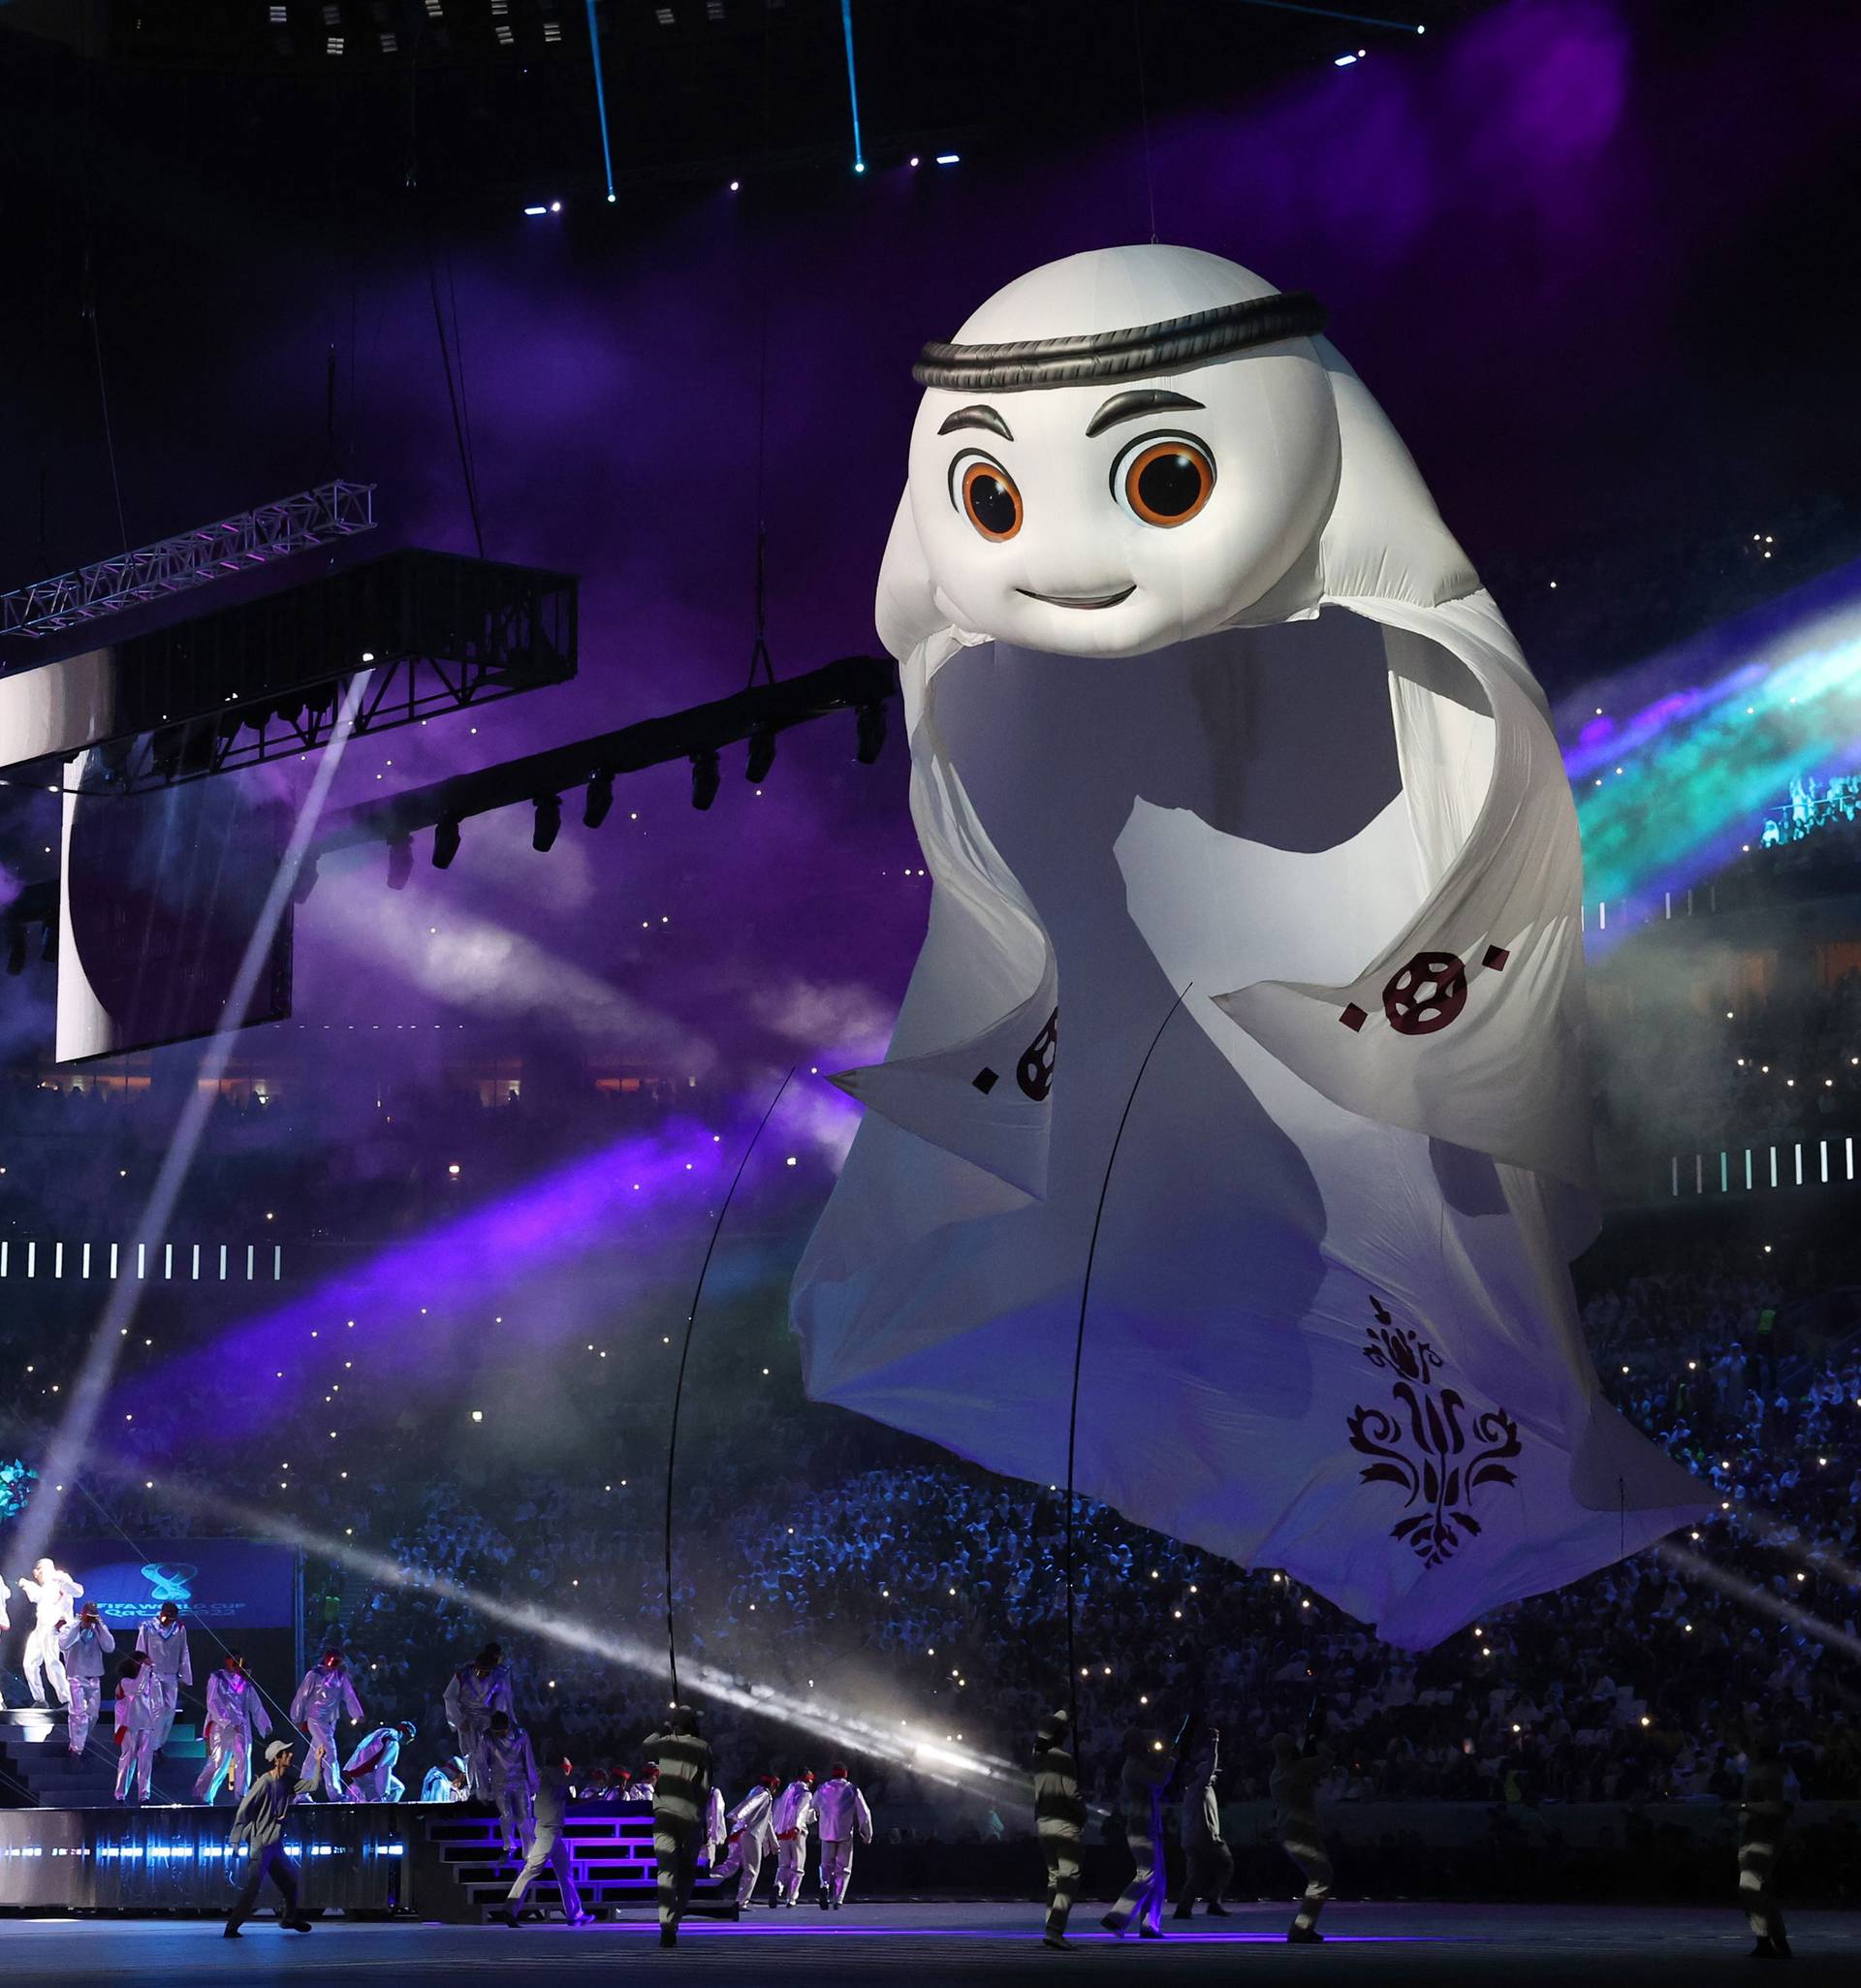 La’eeb, the mascot of the 2022 FIFA World Cup, is seen during the opening ceremony before the Group A match between Qatar and Ecuador at Al Bayt Stadium in Al Khor, Qatar, on Nov. 20, 2022